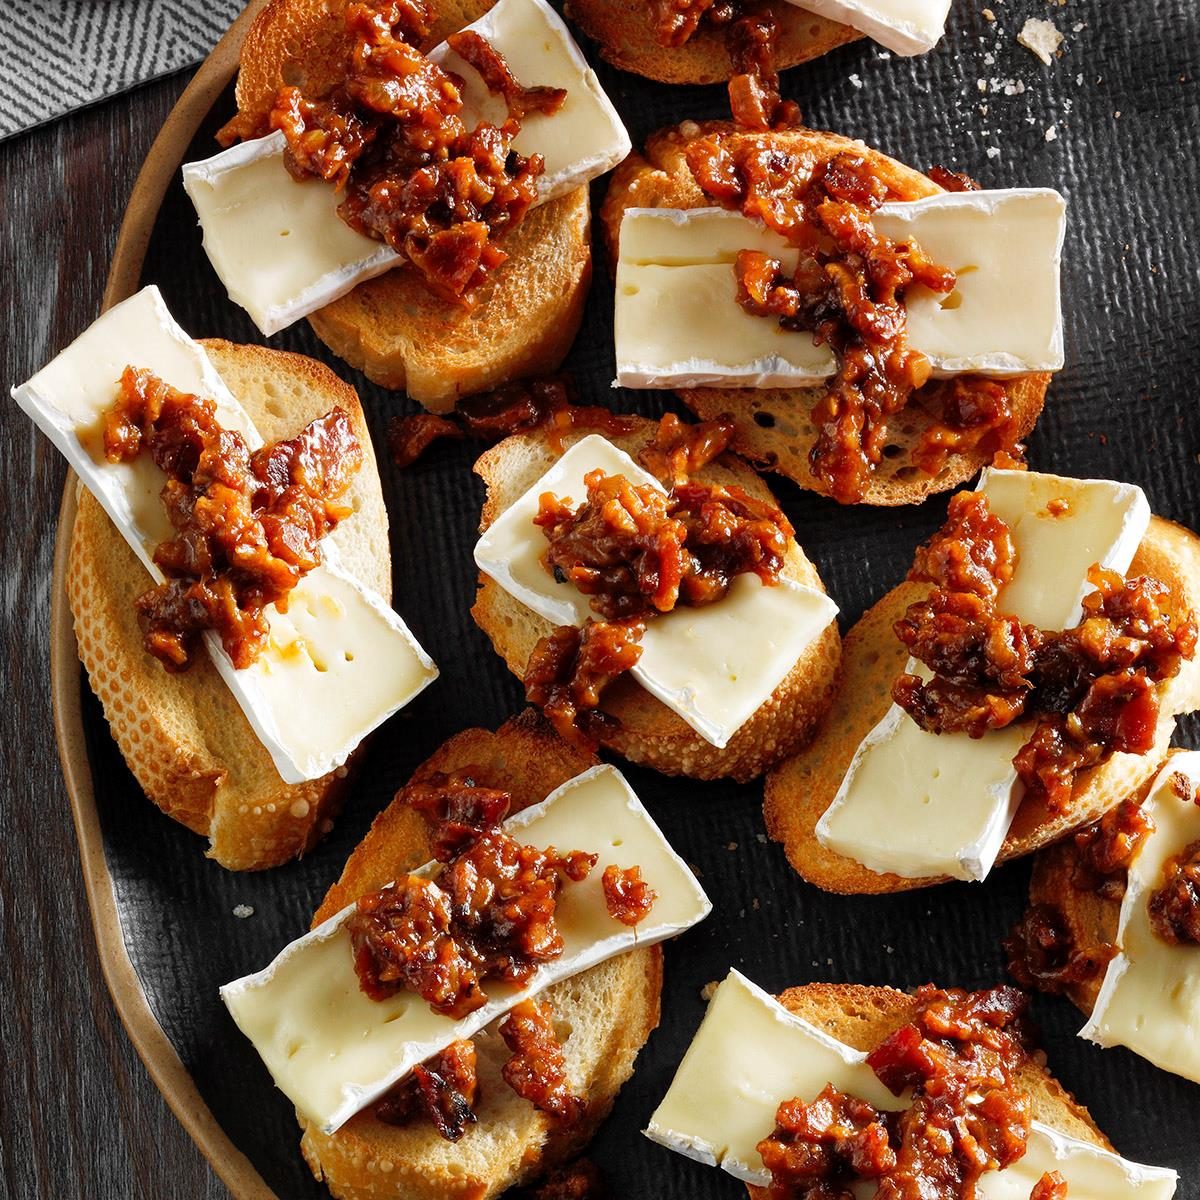 <p>Among my friends I'm known as the pork master, because I love to cook just about every cut there is. These appetizers combine soft, mild Brie cheese with a sweet-sour bacon jam that has a touch of Sriracha sauce. —Rick Pascocello, New York, New York</p> <div class="listicle-page__buttons"> <div class="listicle-page__cta-button"><a href='https://www.tasteofhome.com/recipes/brie-appetizers-with-bacon-plum-jam/'>Go to Recipe</a></div> </div>